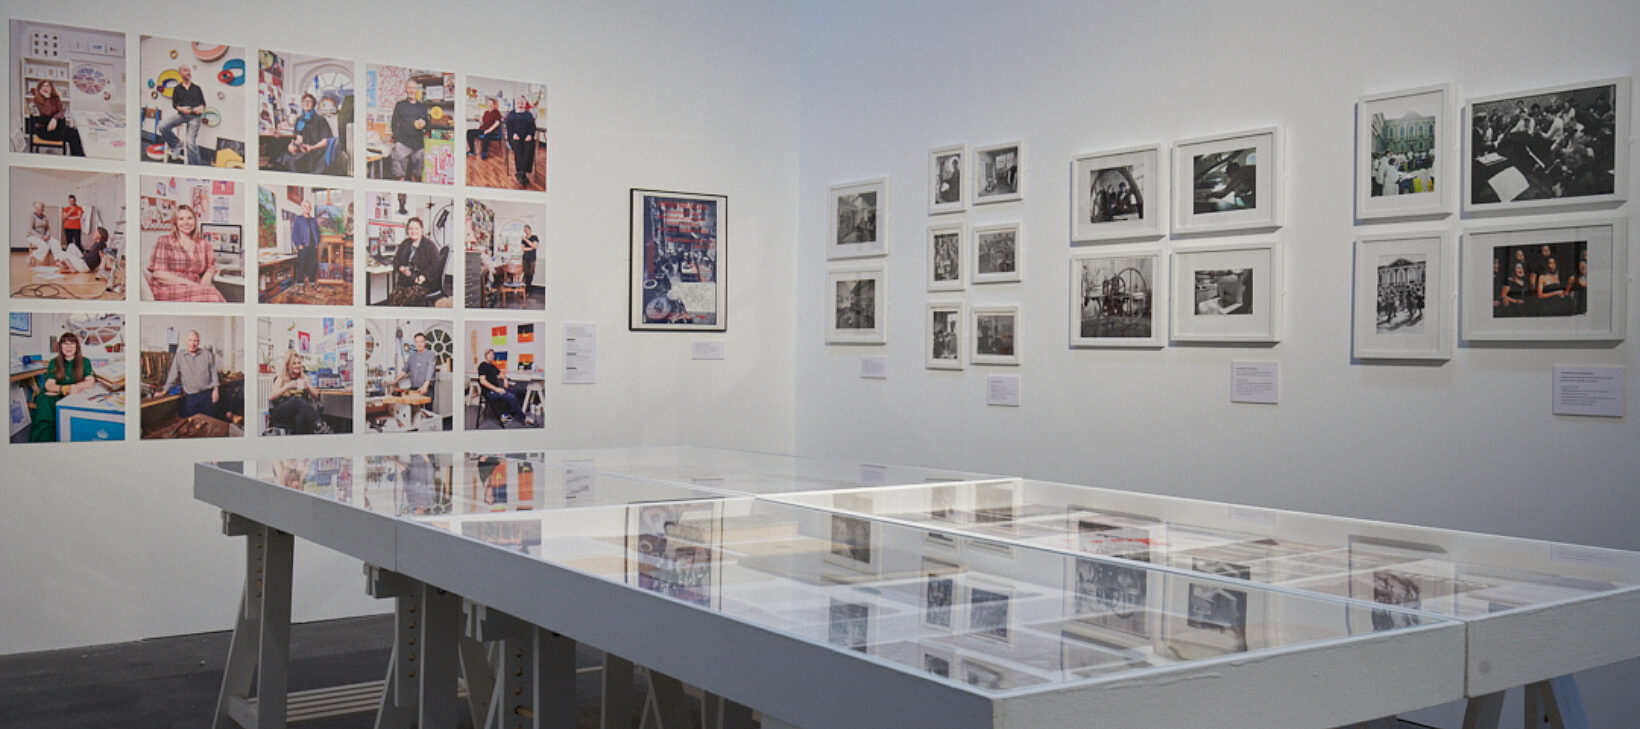 A photograph showing the Bluecoat's archival exhibition, A Creative Community. There are many images and archival materials on the wall, as well as a large display case showcasing more work.